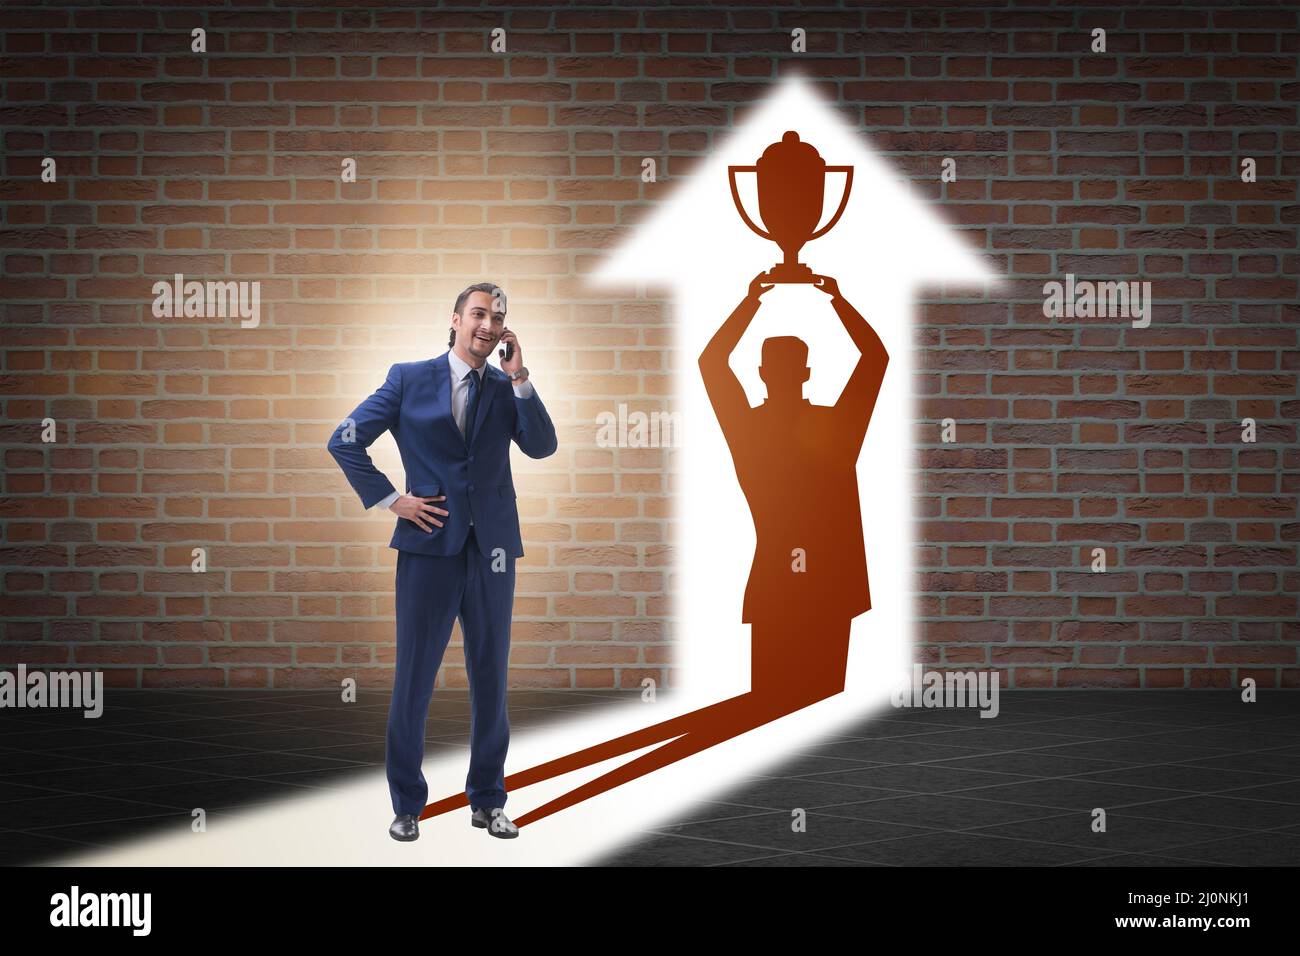 Businessman dreaming of top prize in business concept Stock Photo